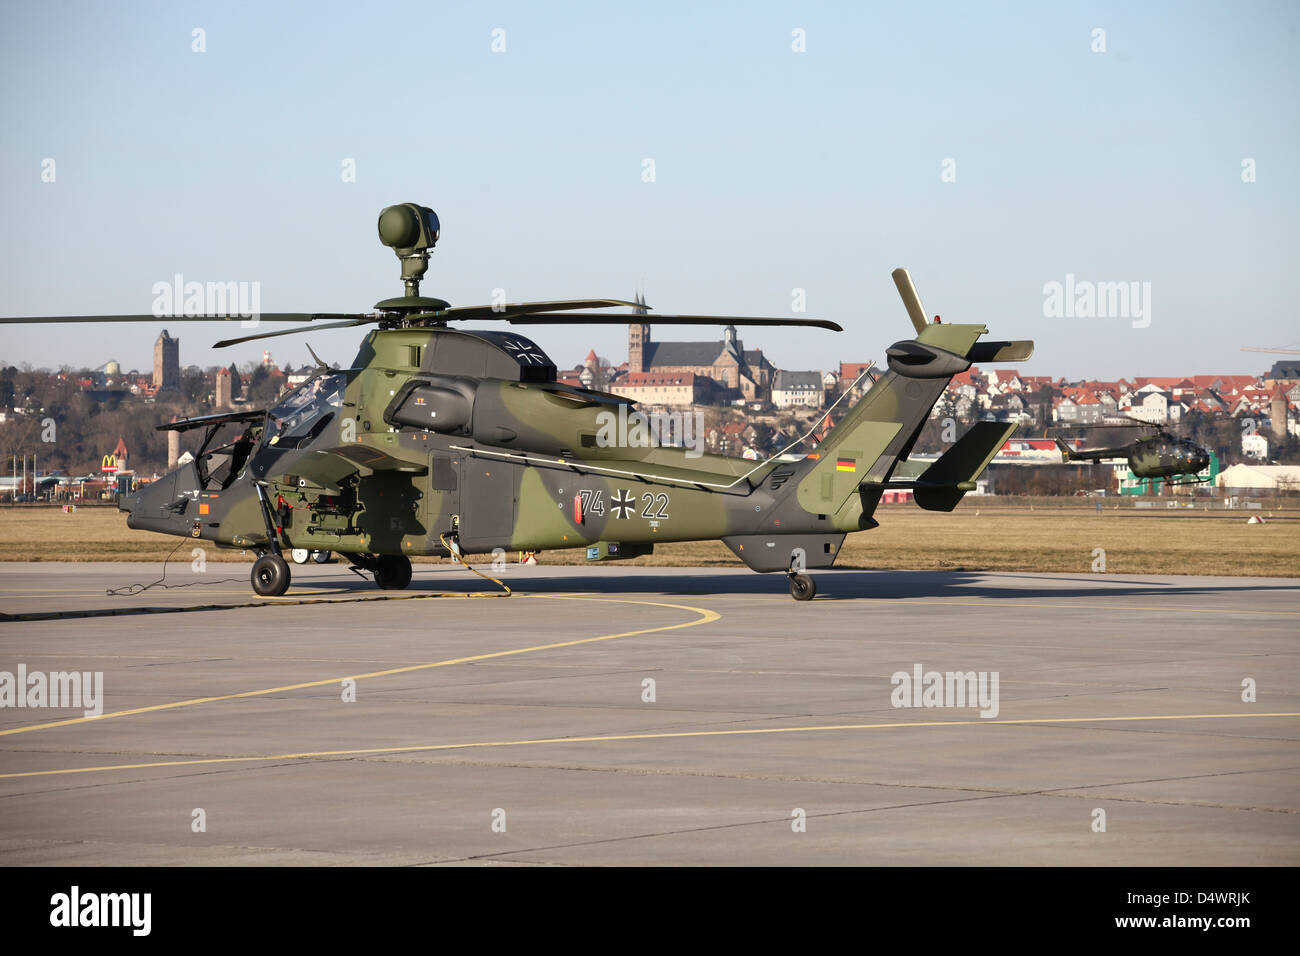 German Tiger Eurocopter at Fritzlar Airfield, Germany, in preparation for Afghanistan deployment. Stock Photo